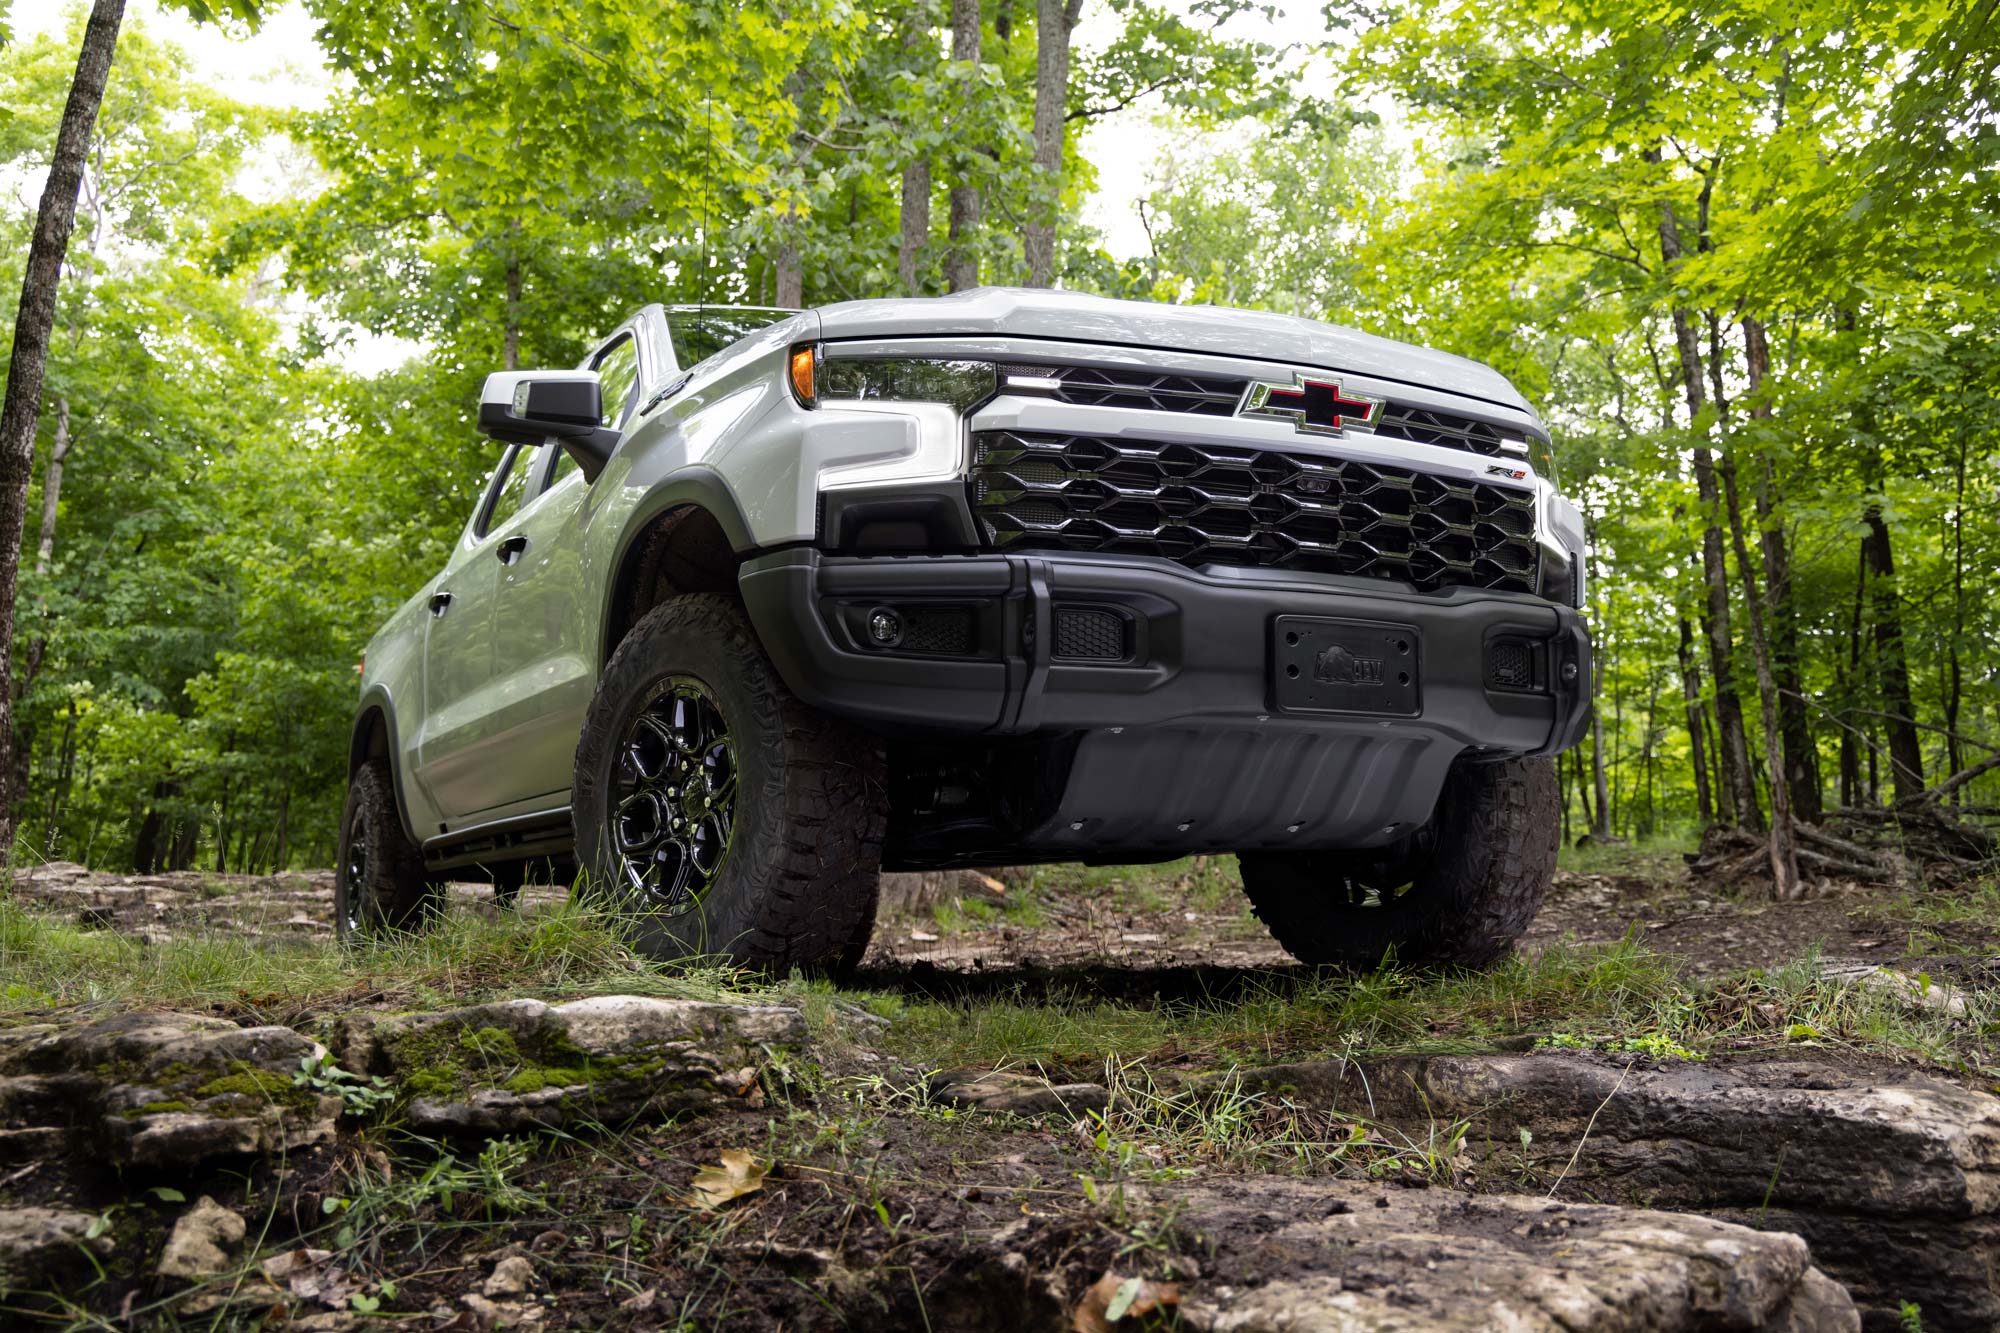 2023 Chevrolet Silverado ZR2 Bison parked off road in a forest. 